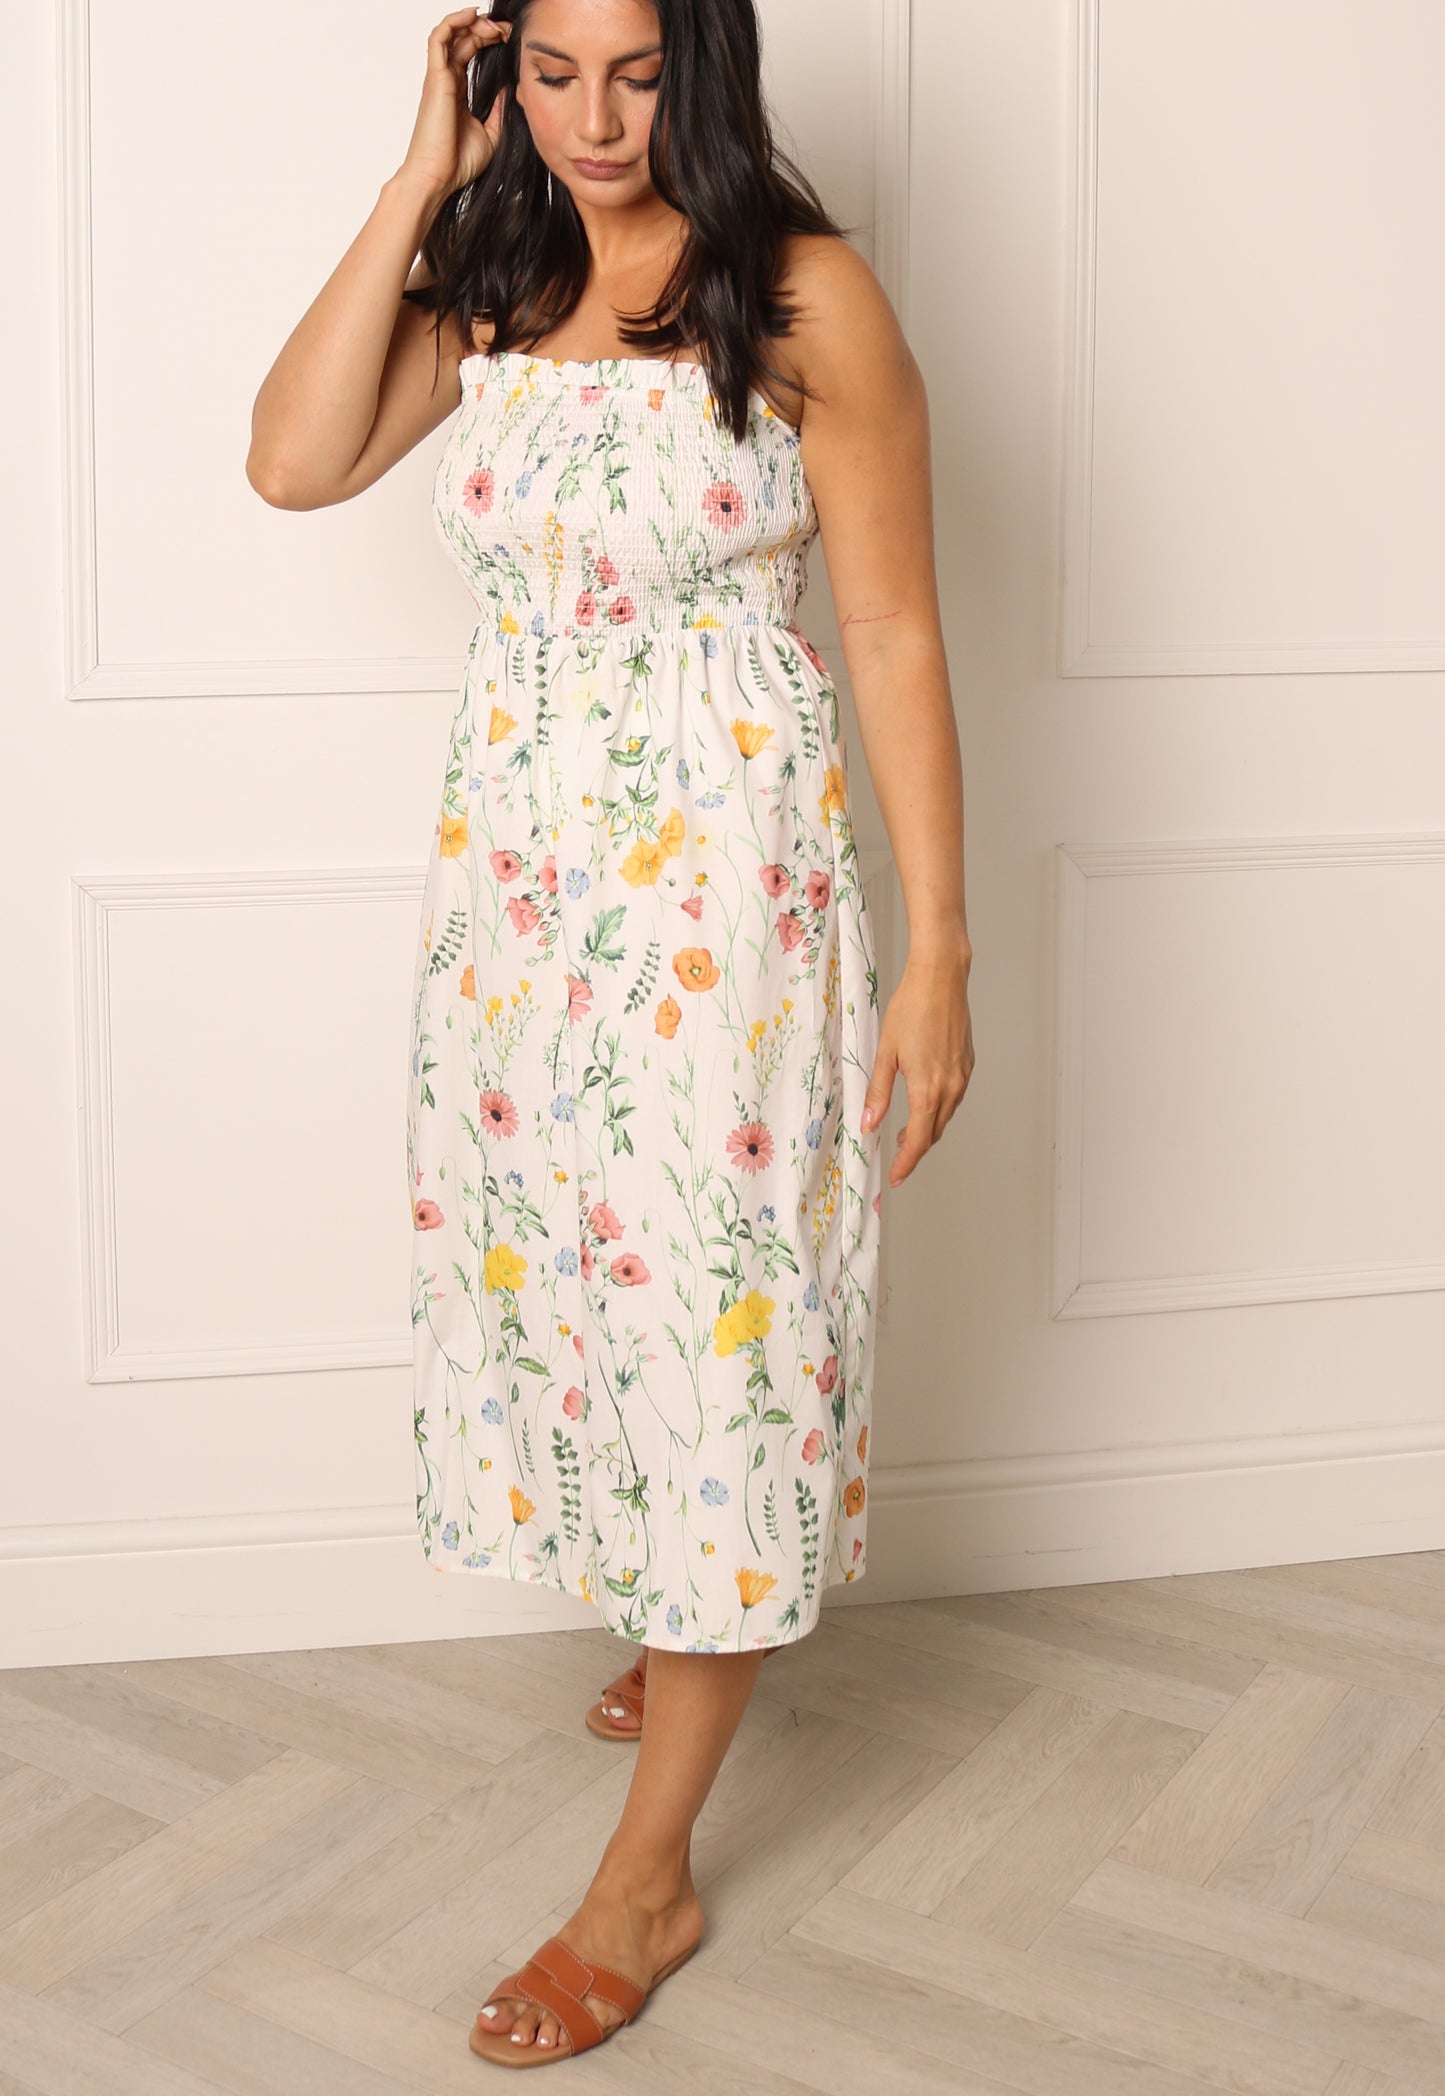 VILA Capro Floral Shirred Bandeau Cotton Midi Sun Dress in White, Yellow & Pink Tones - One Nation Clothing